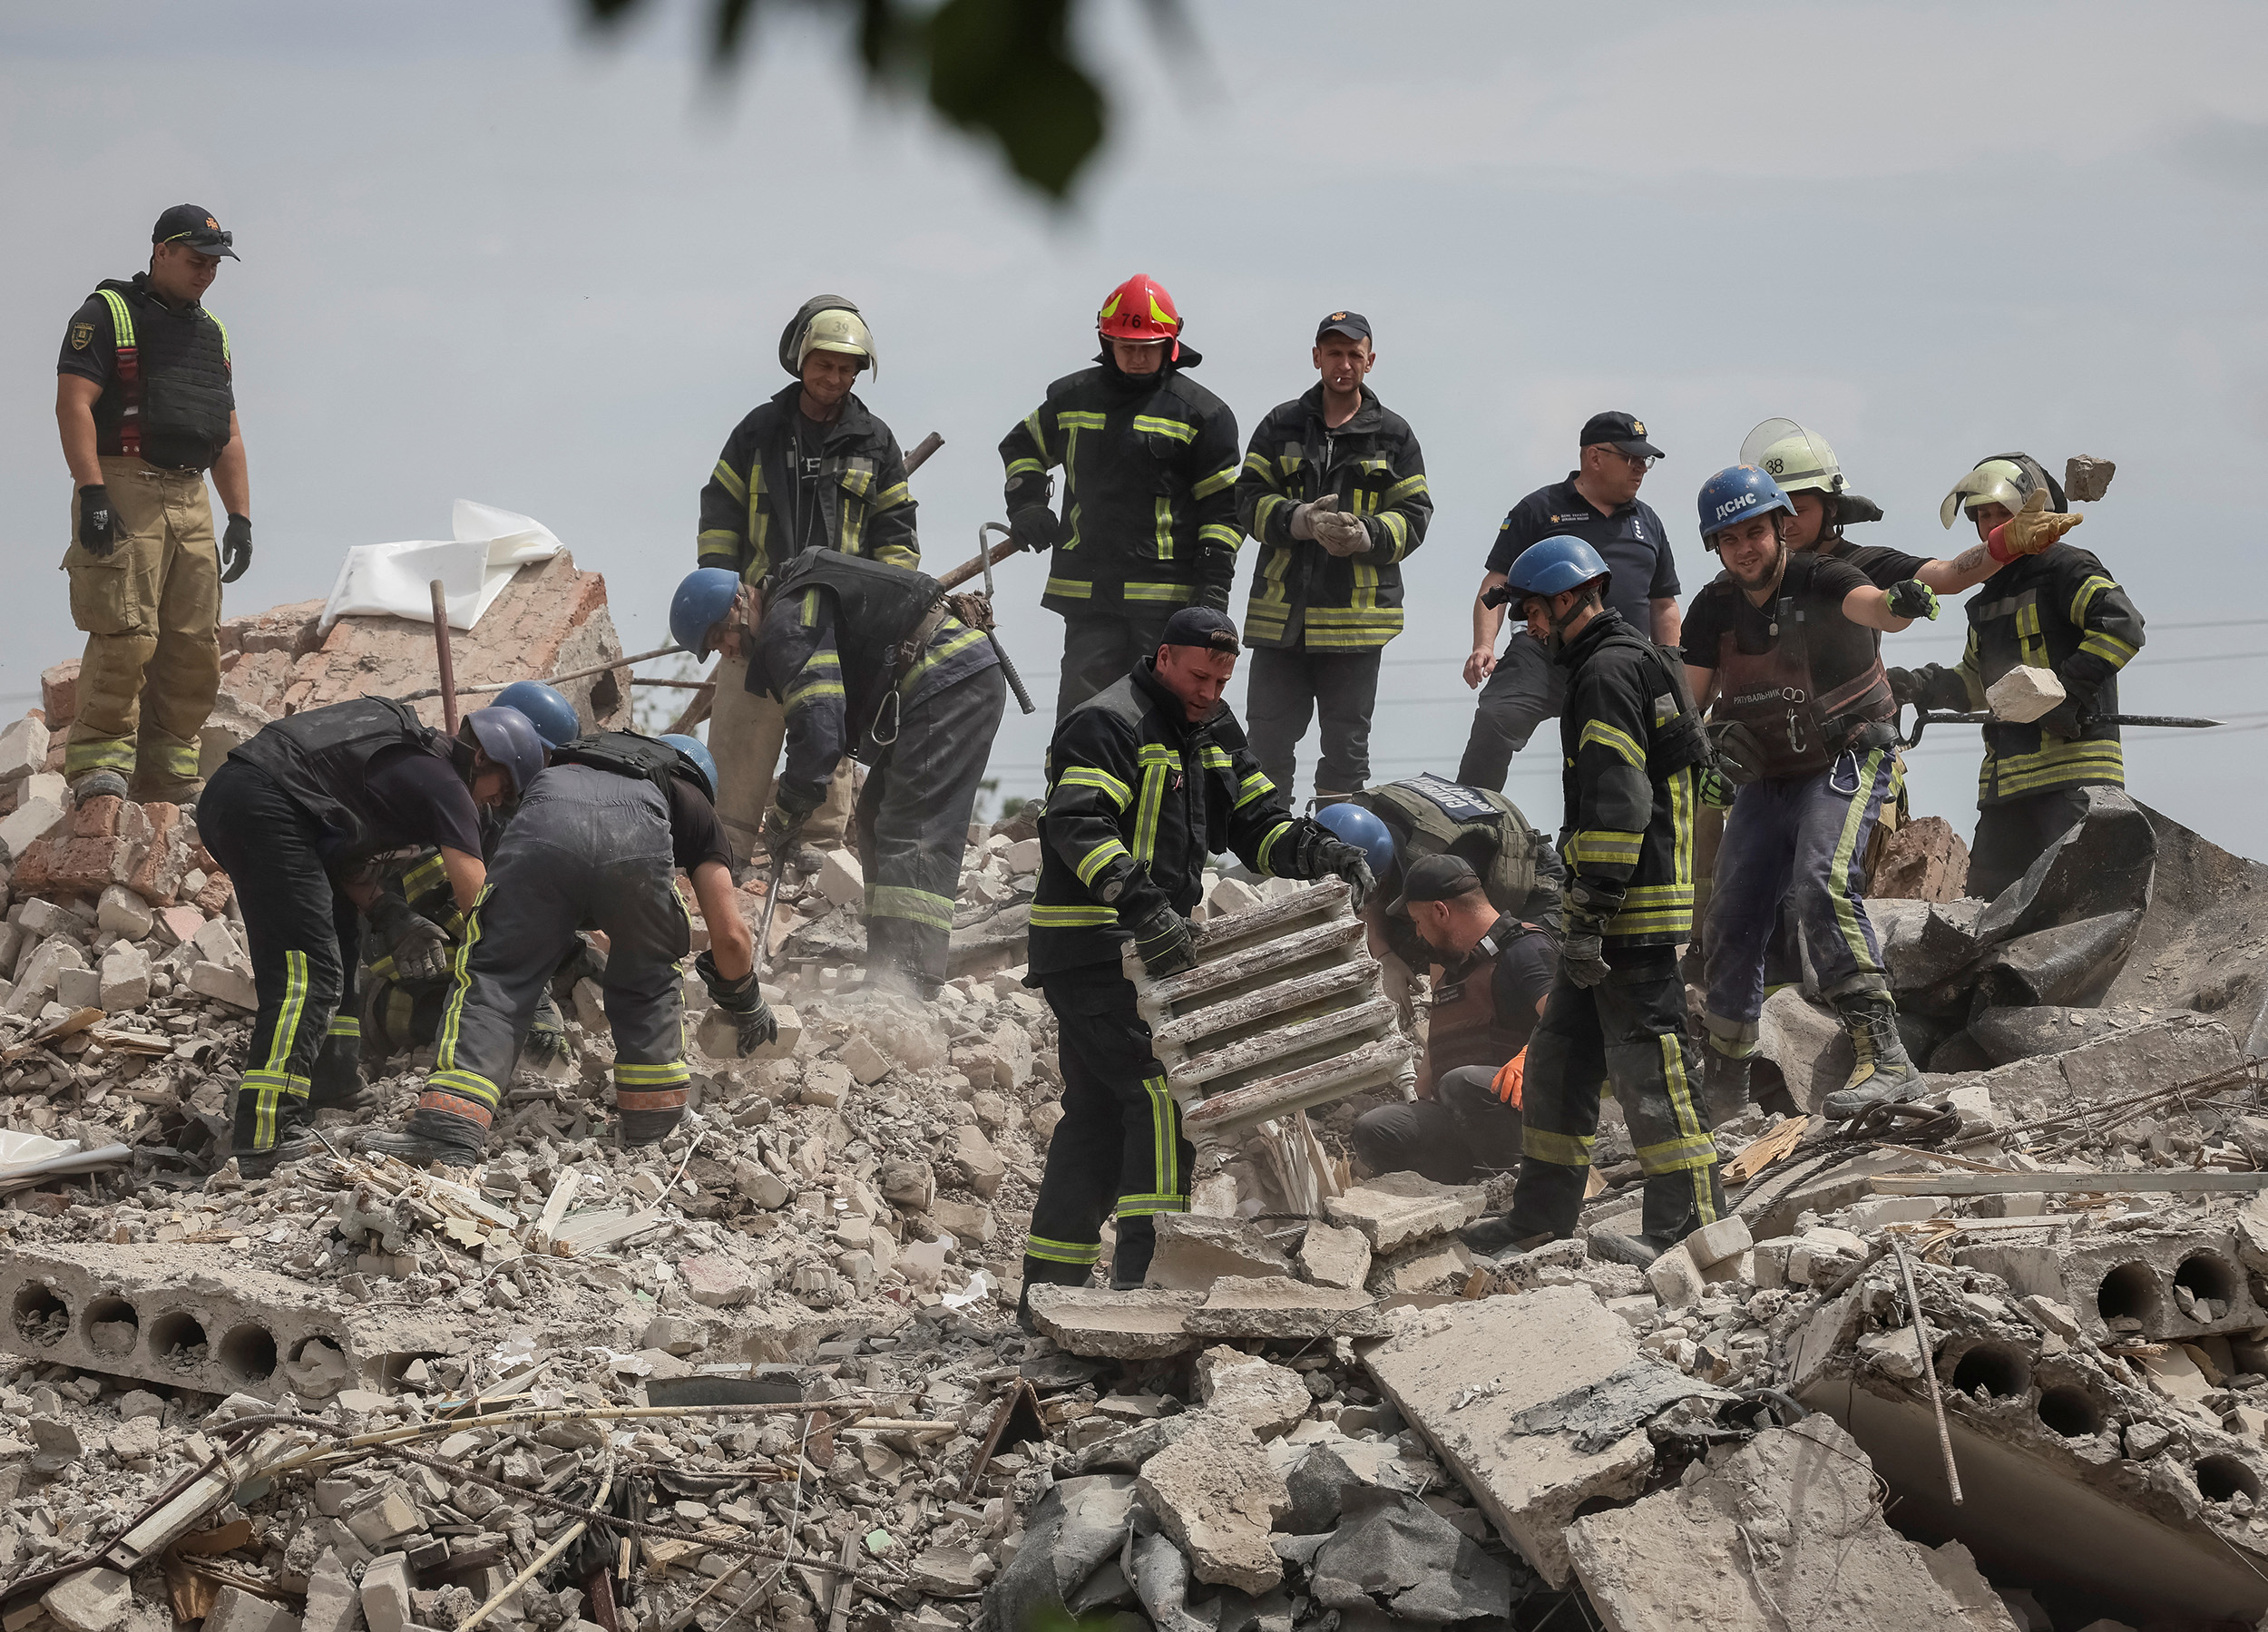 Rescuers work amid the ruins of a residential building damaged in the town of Chasiv Yar, in the Donetsk region, Ukraine, on July 10.